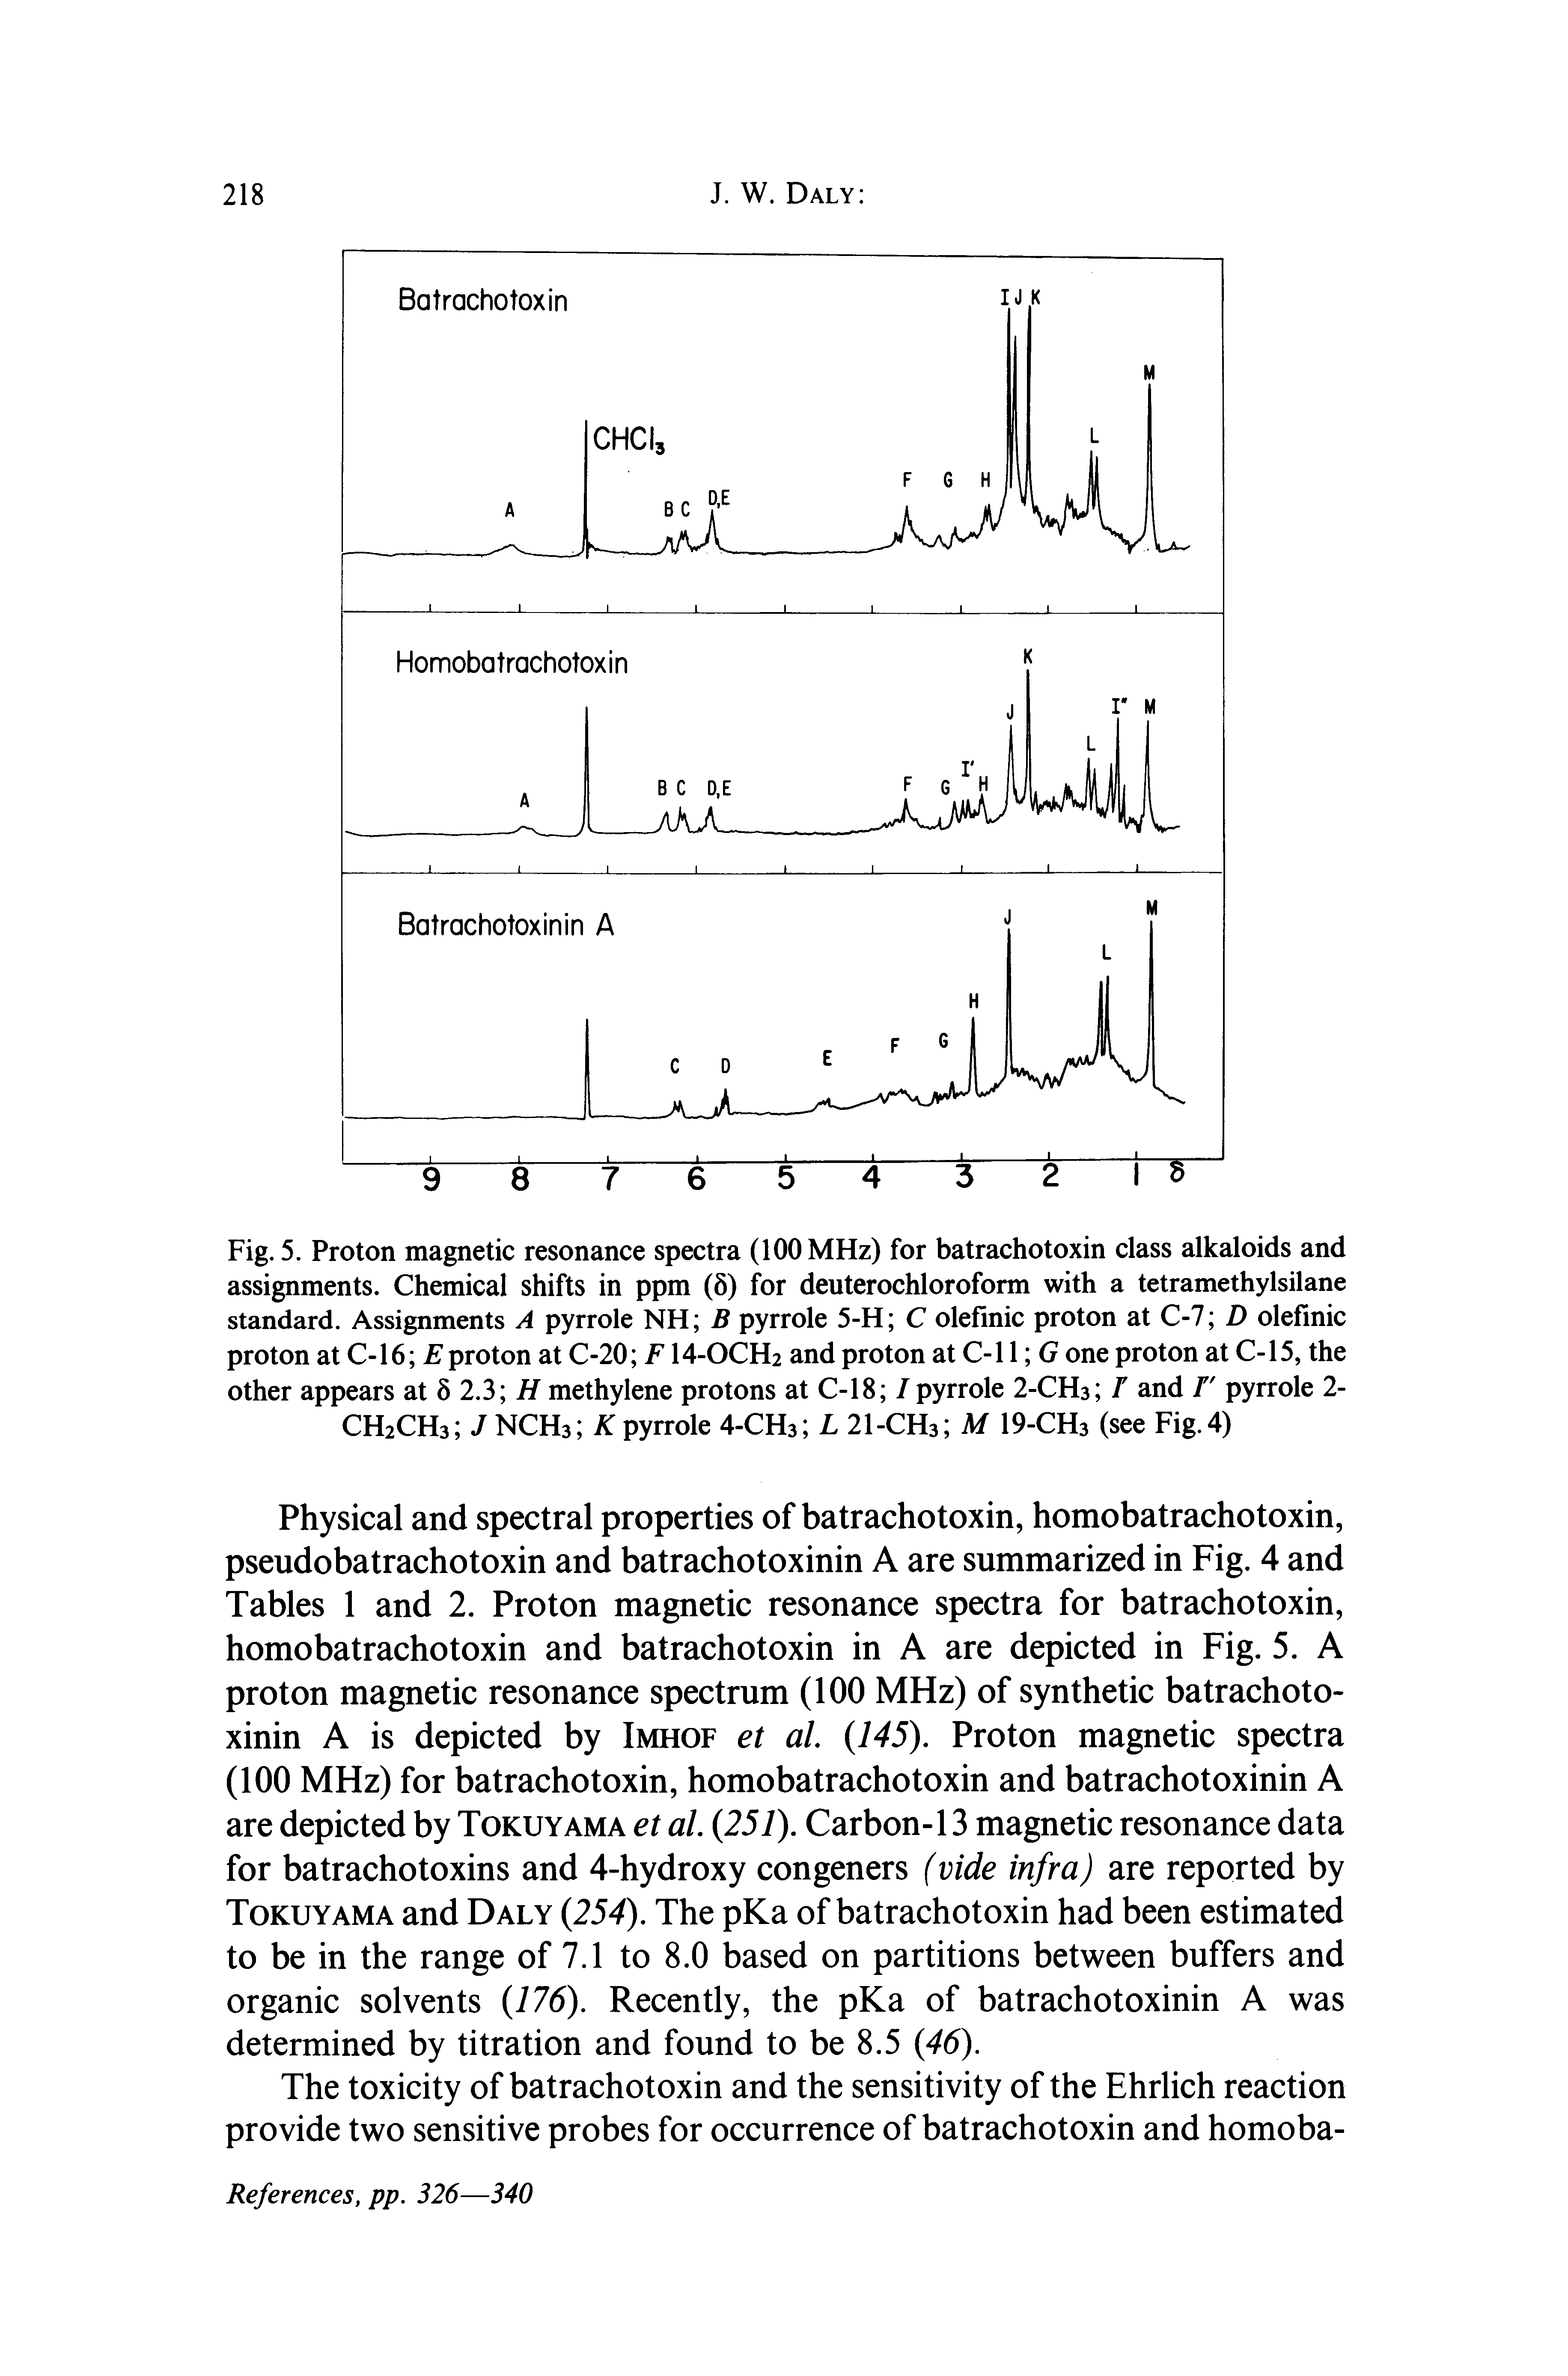 Fig. 5. Proton magnetic resonance spectra (100 MHz) for batrachotoxin class alkaloids and assignments. Chemical shifts in ppm (5) for deuterochloroform with a tetramethylsilane standard. Assignments A pyrrole NH B pyrrole 5-H C olefinic proton at C-7 D oleflnic proton at C-16 proton at C-20 FI4-OCH2 and proton at C-11 G one proton at C-15, the other appears at 6 2.3 methylene protons at C-18 / pyrrole 2-CH3 T and / pyrrole 2-CH2CH3 / NCH3 K pyrrole 4-CH3 L 2I-CH3 M I9-CH3 (see Fig. 4)...